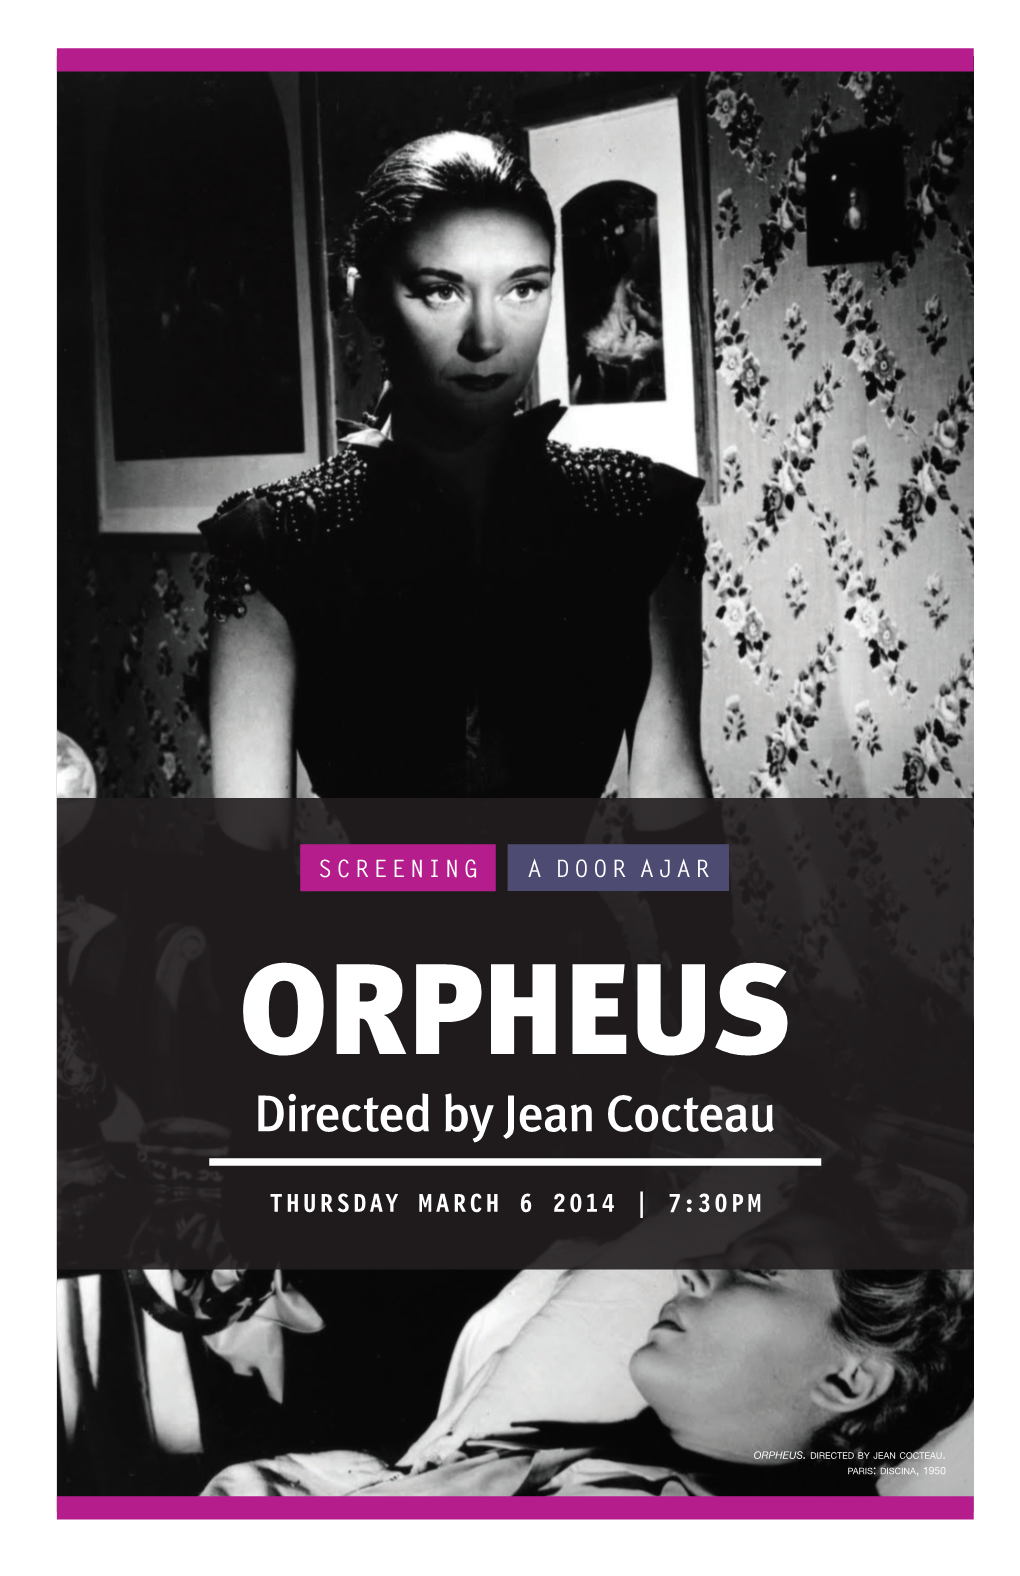 ORPHEUS Directed by Jean Cocteau